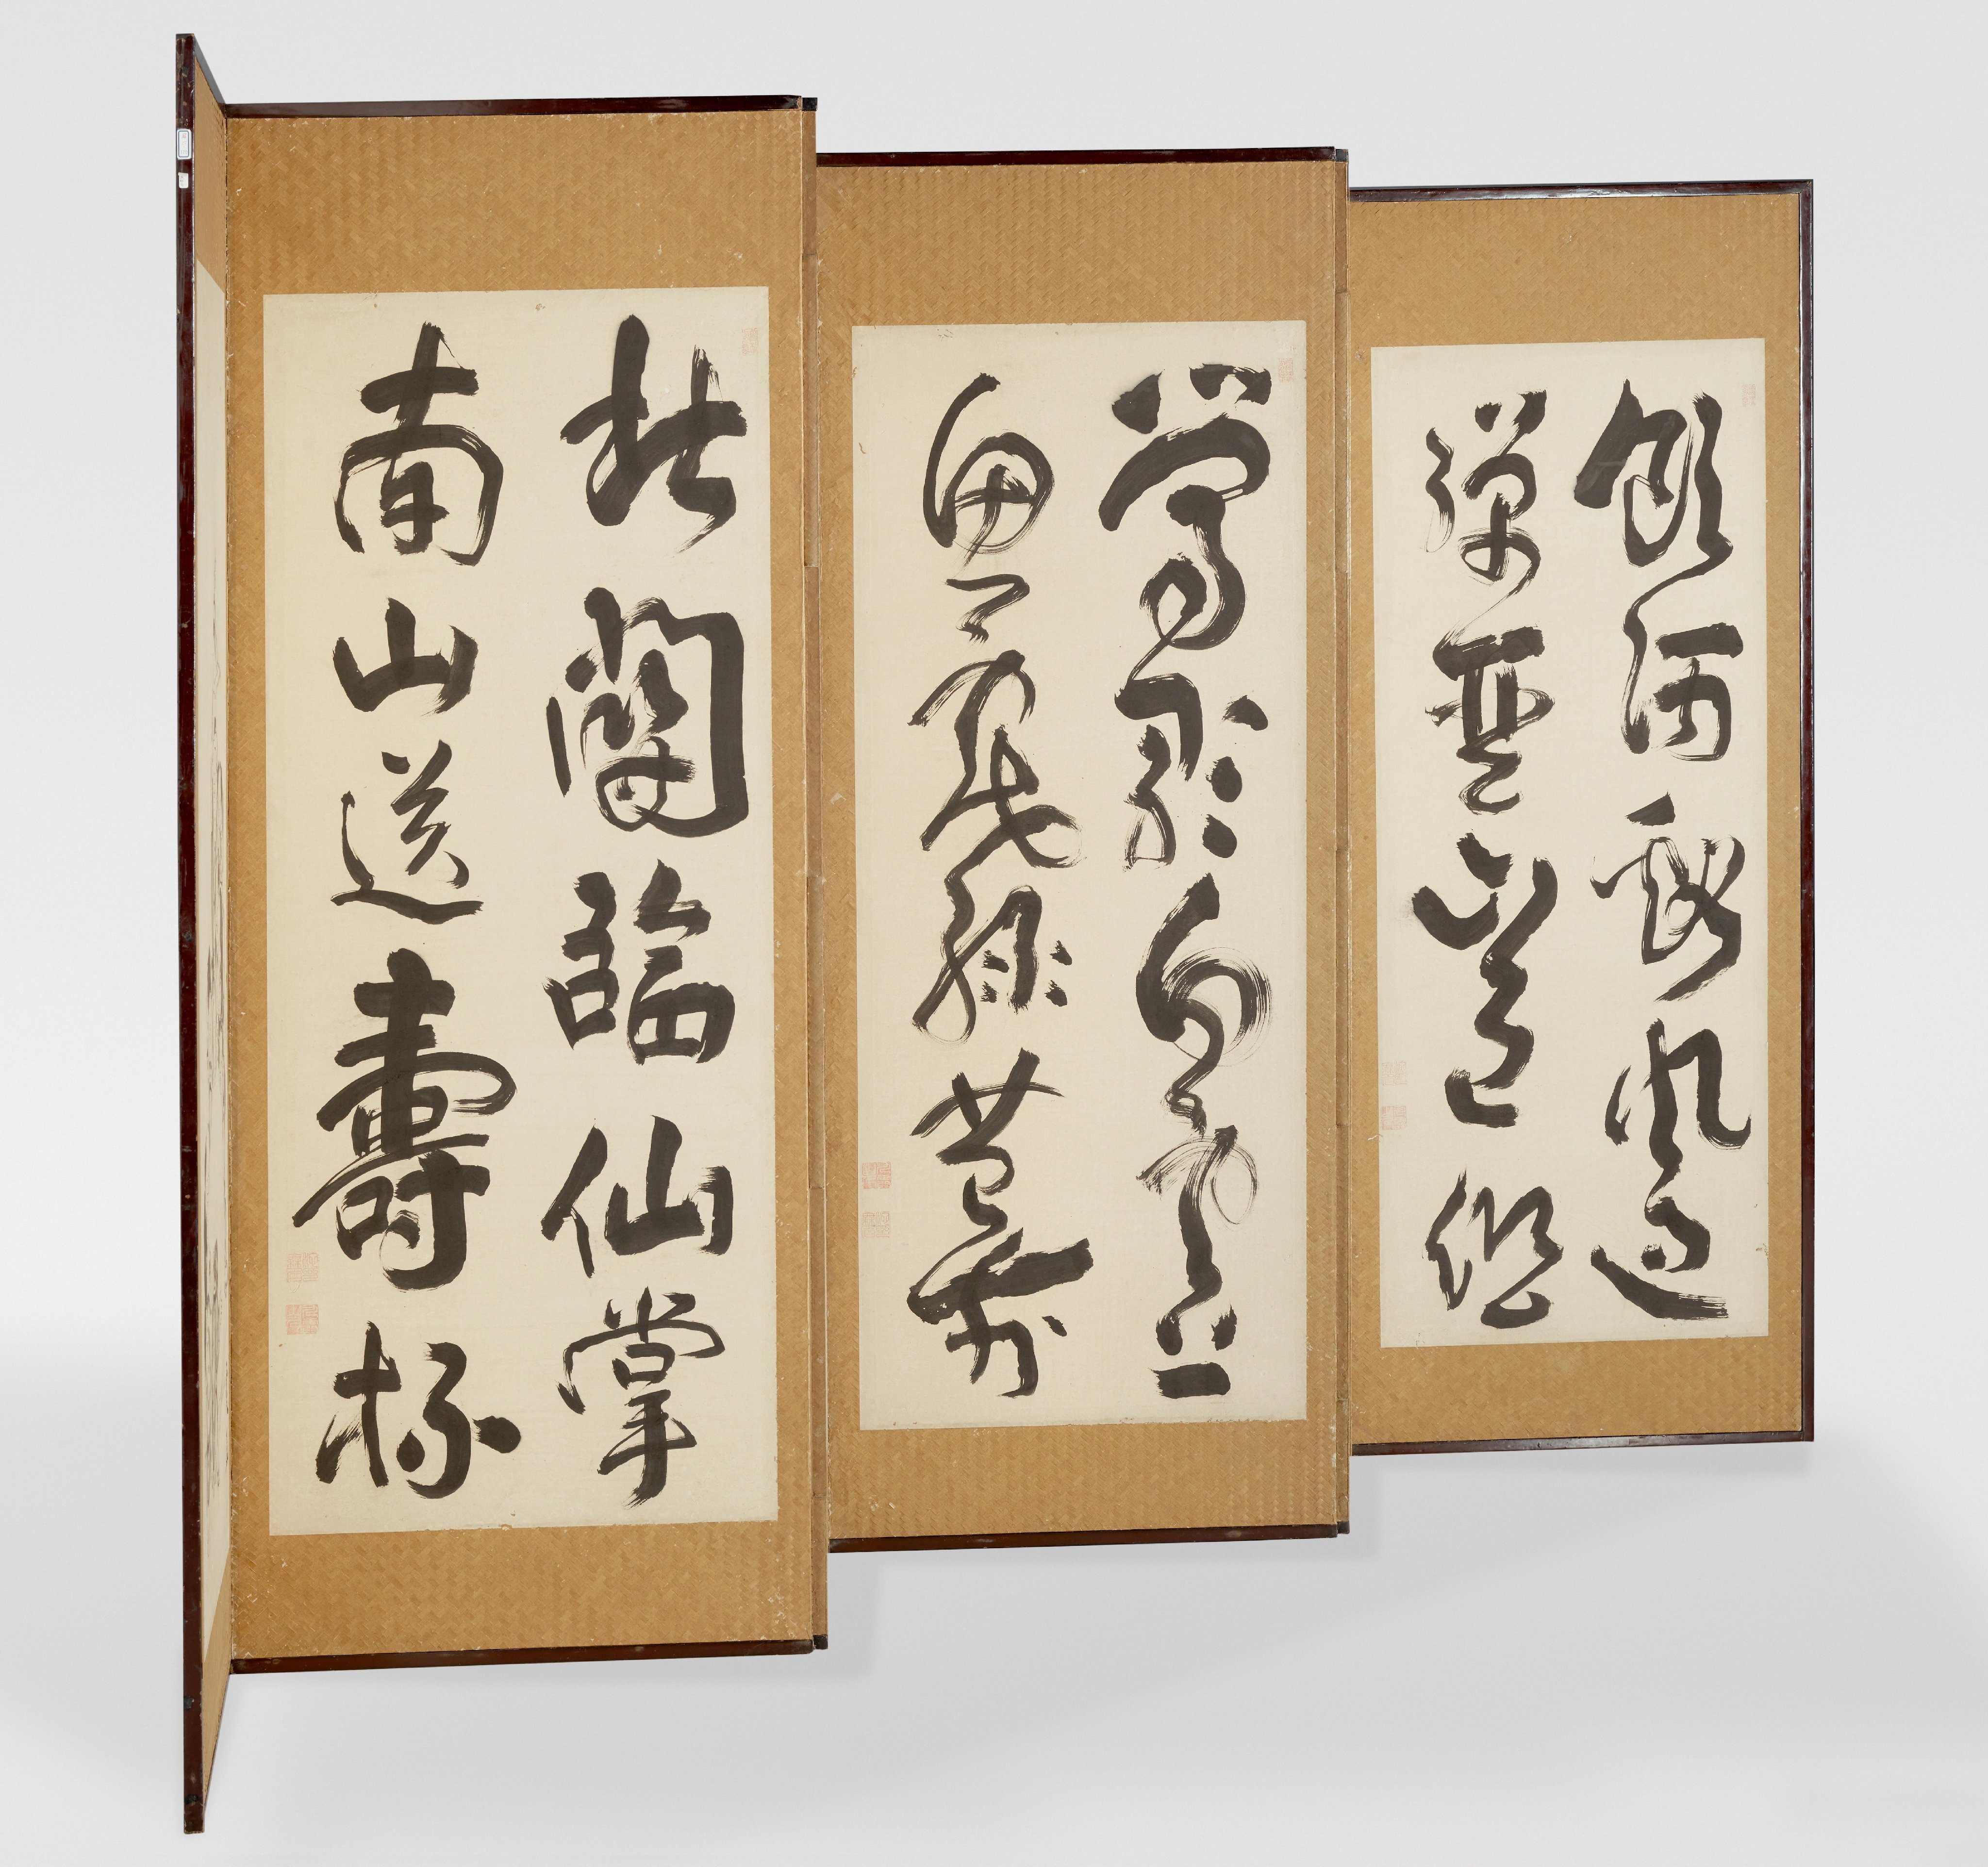 Ink and Brush: The beauty and spirit of Japanese calligraphy